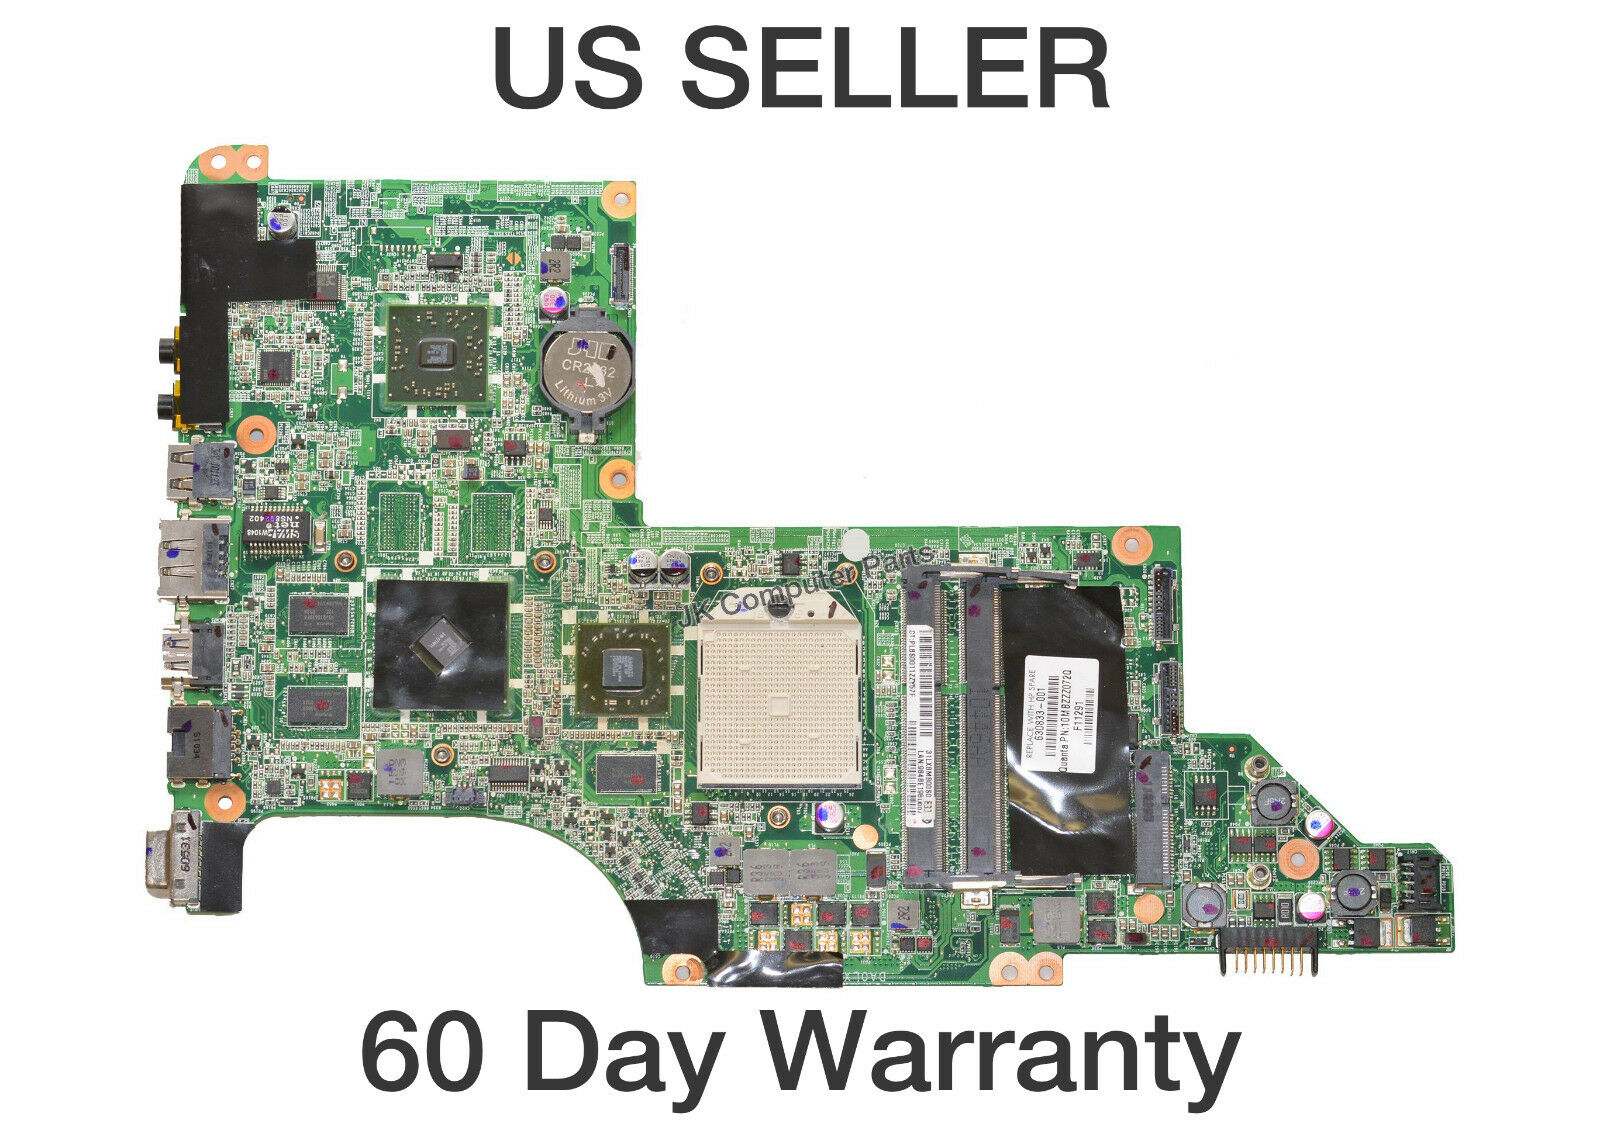 HP DV7-4000 AMD Laptop Motherboard s1 630833-001 630833001 Brand: HP Compatible CPU Brand: AMD MPN: 63083